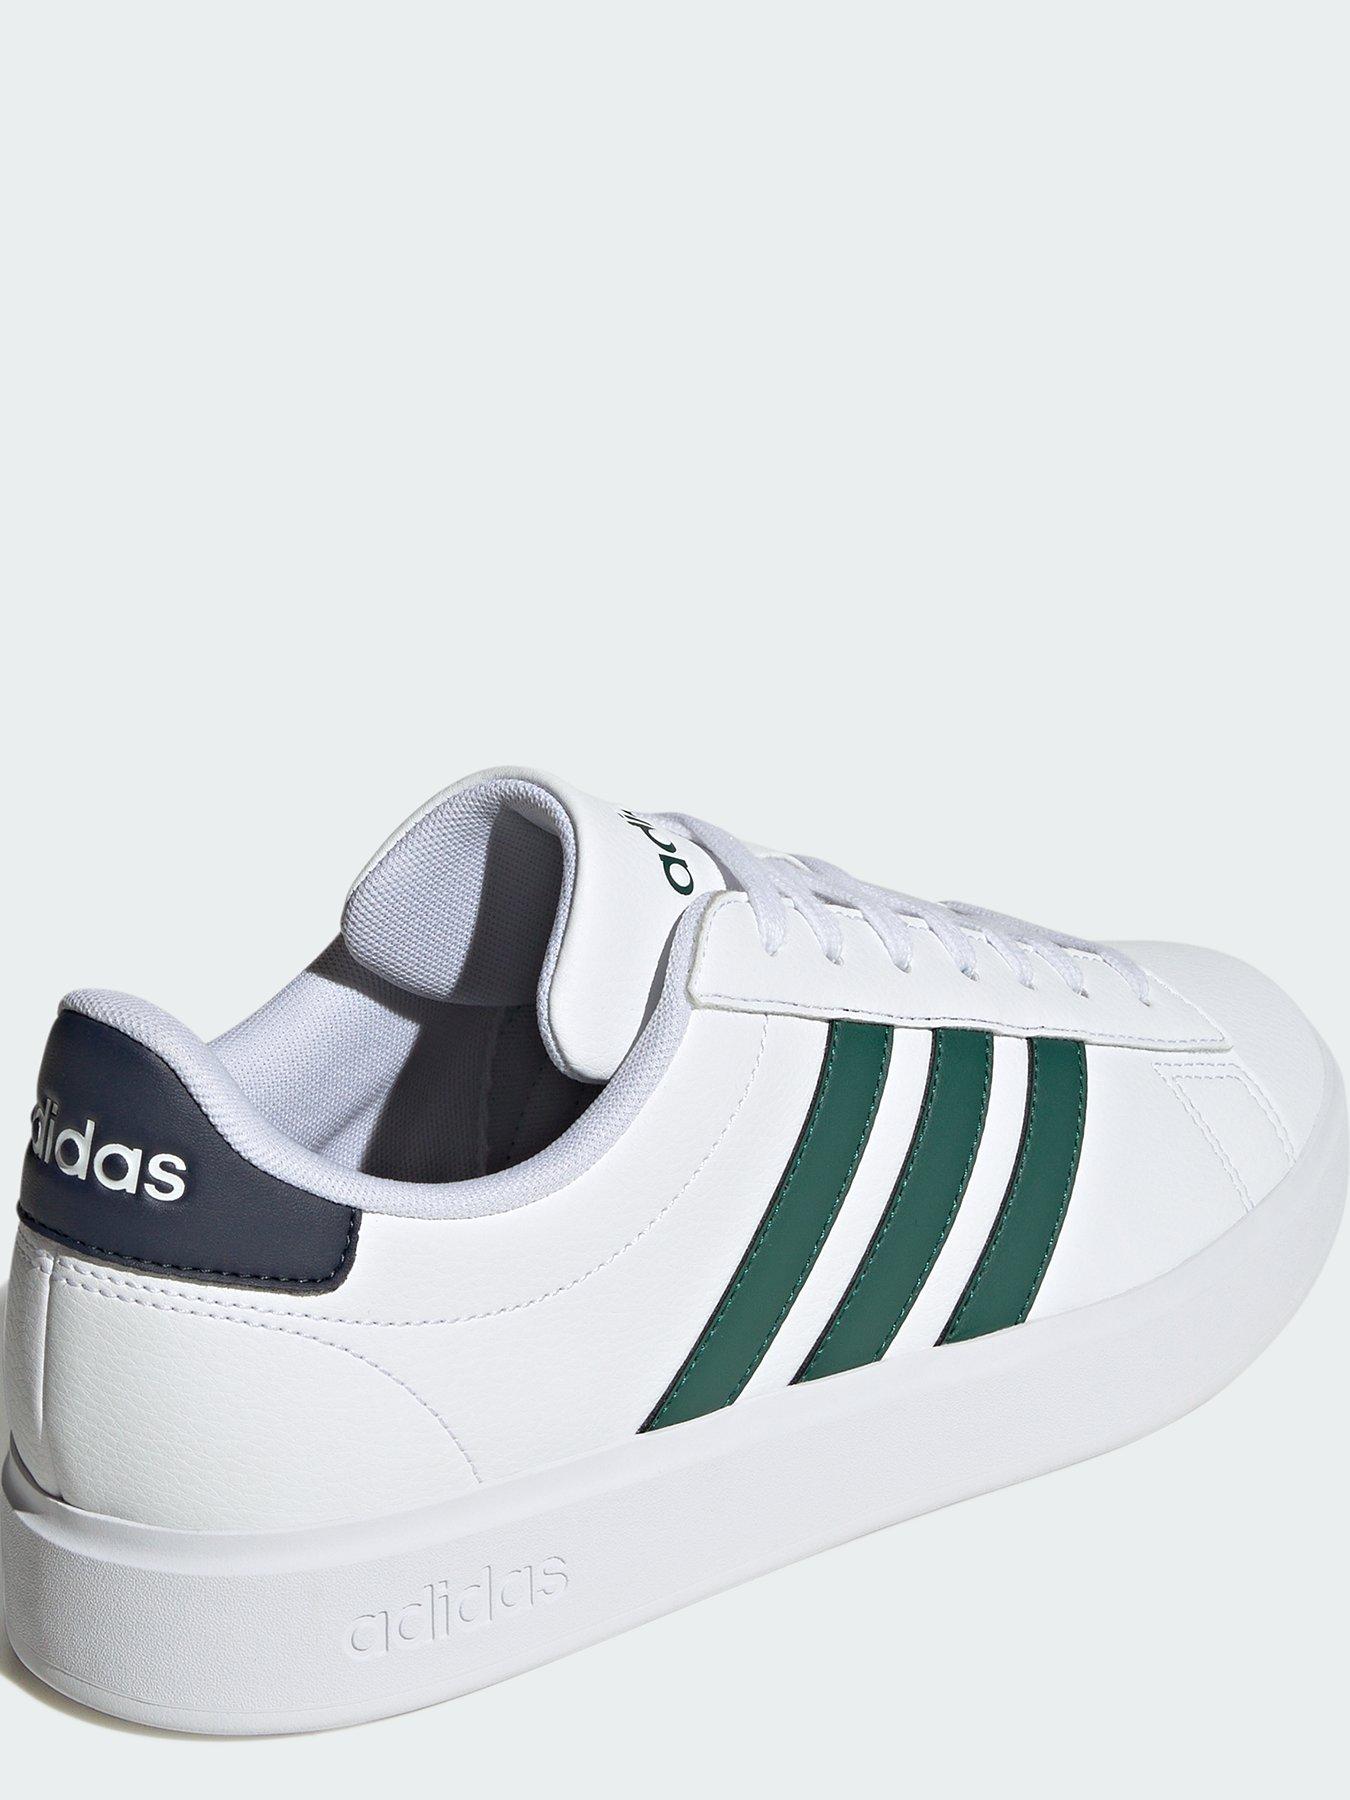 adidas White & Green Grand Court 2.0 Trainers